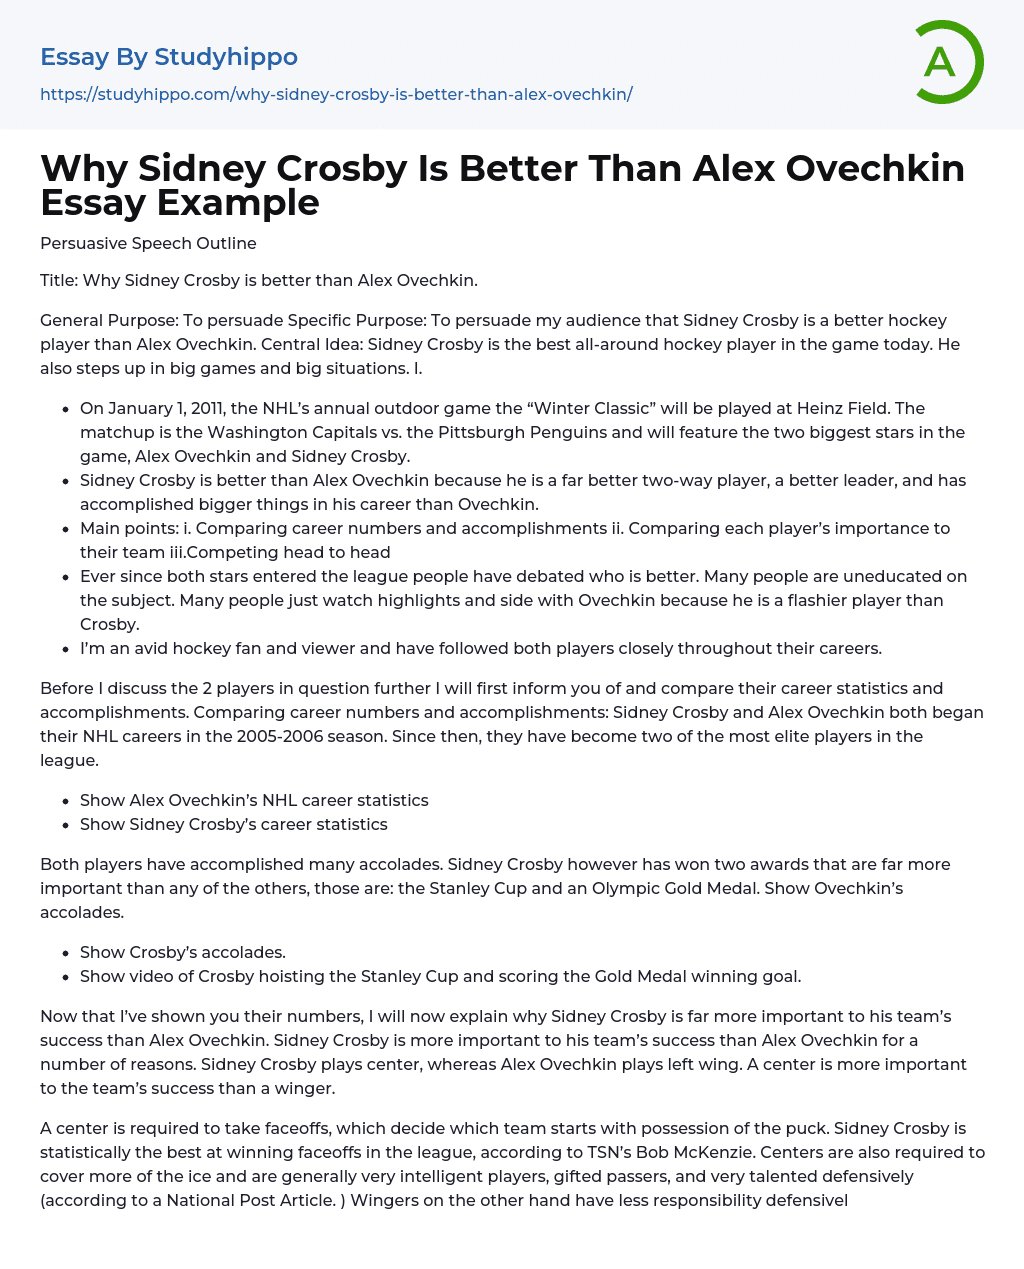 Why Sidney Crosby is better than Alex Ovechkin? Essay Example